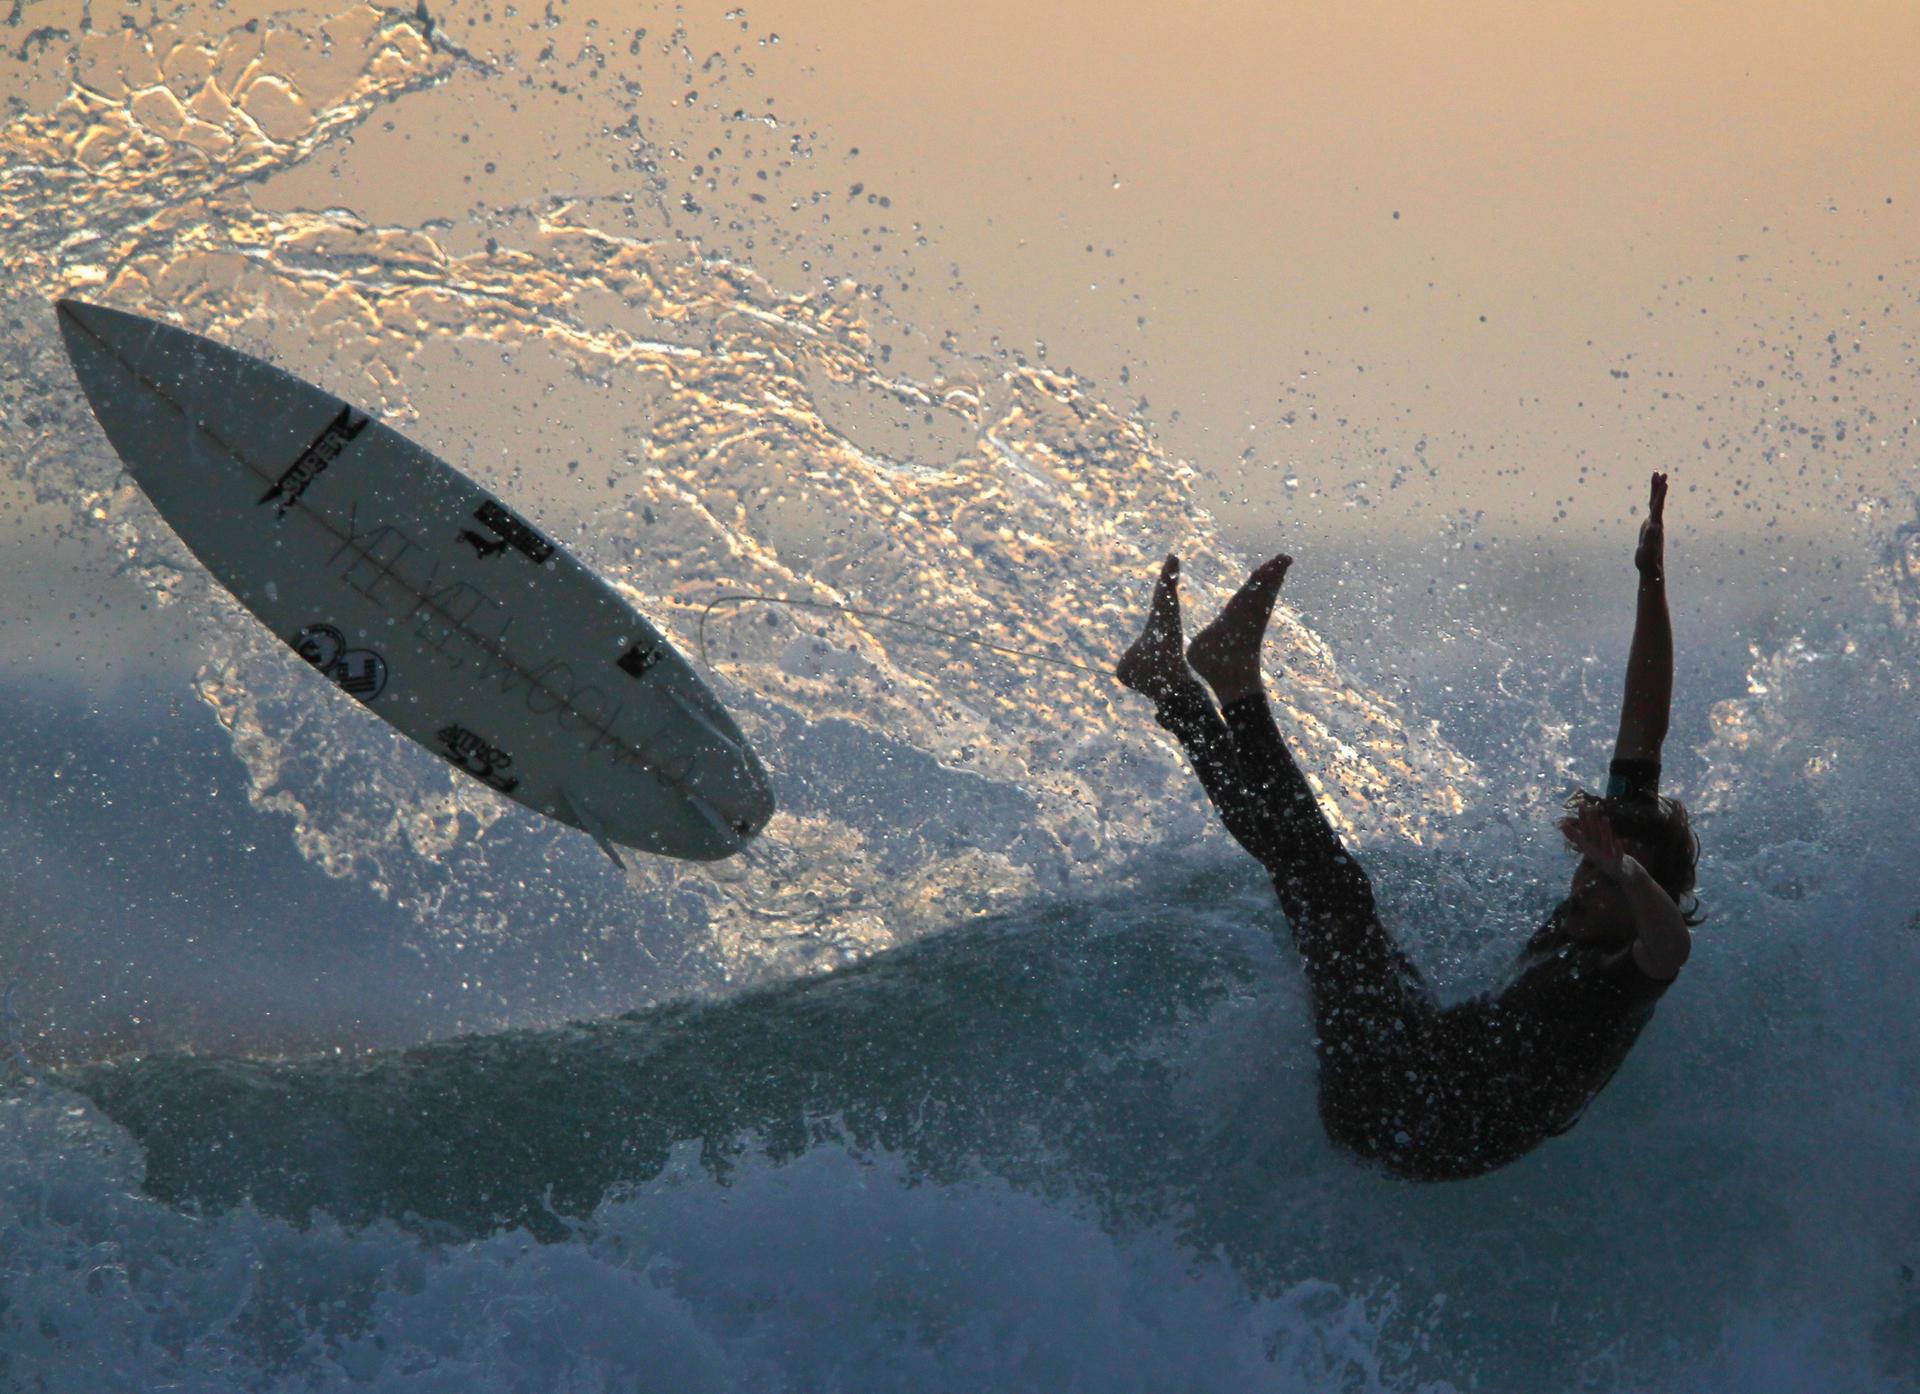 A surfer falls from his board while riding after sunset in Cardiff, California.